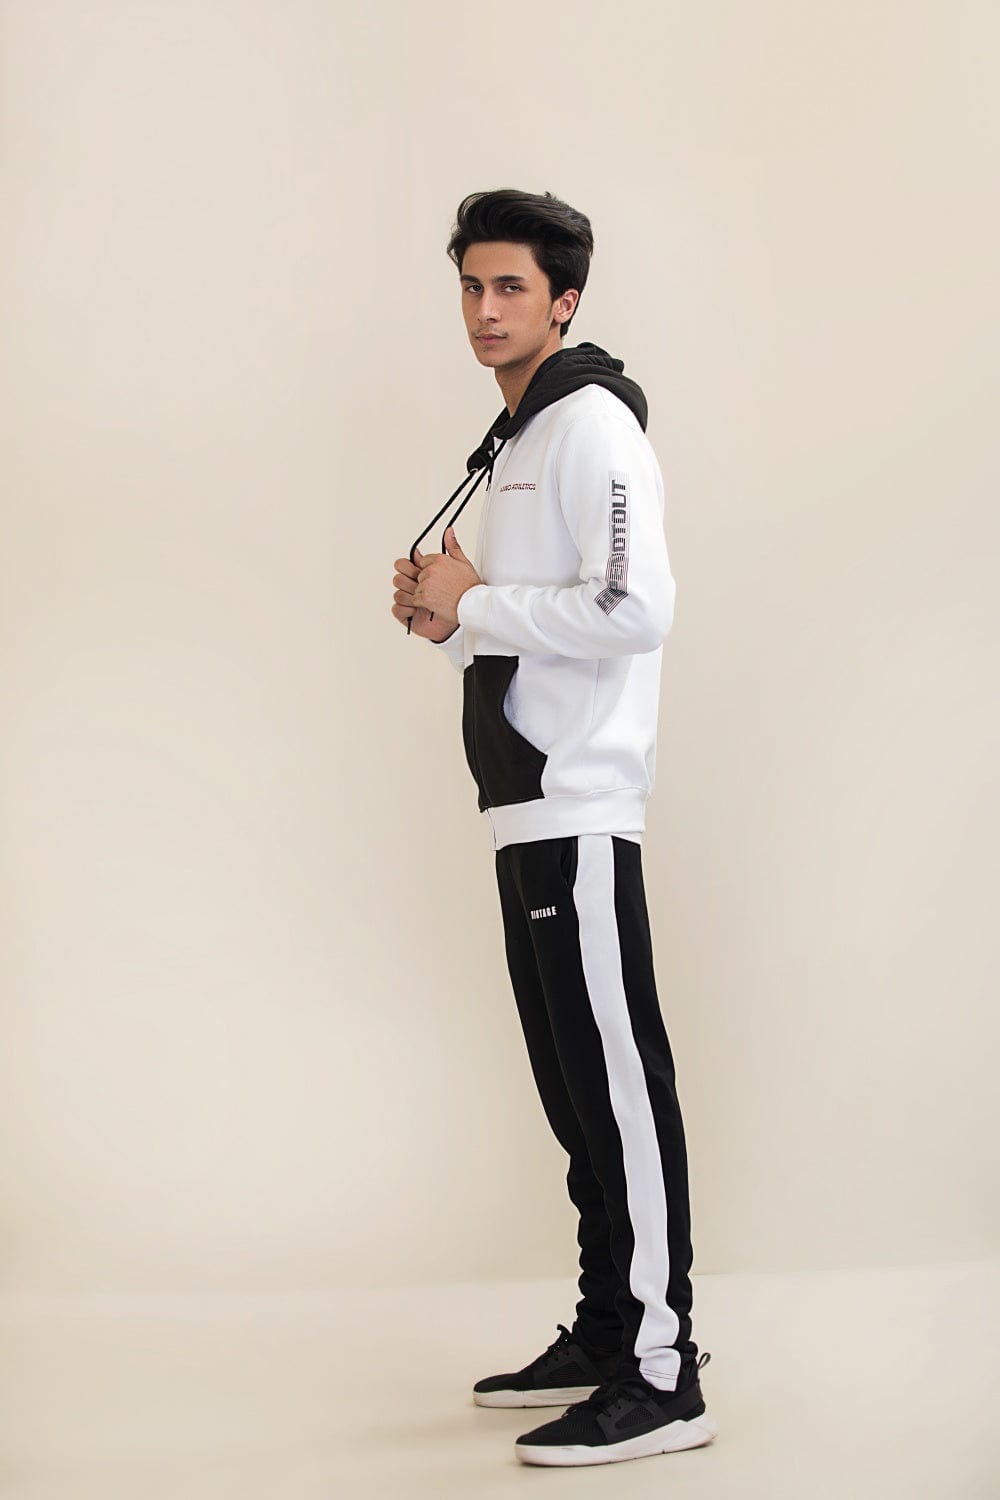 Hope Not Out by Shahid Afridi Men Hoody Premium Graphic Zipper With Contrast Hood and Kangaroo Pockets